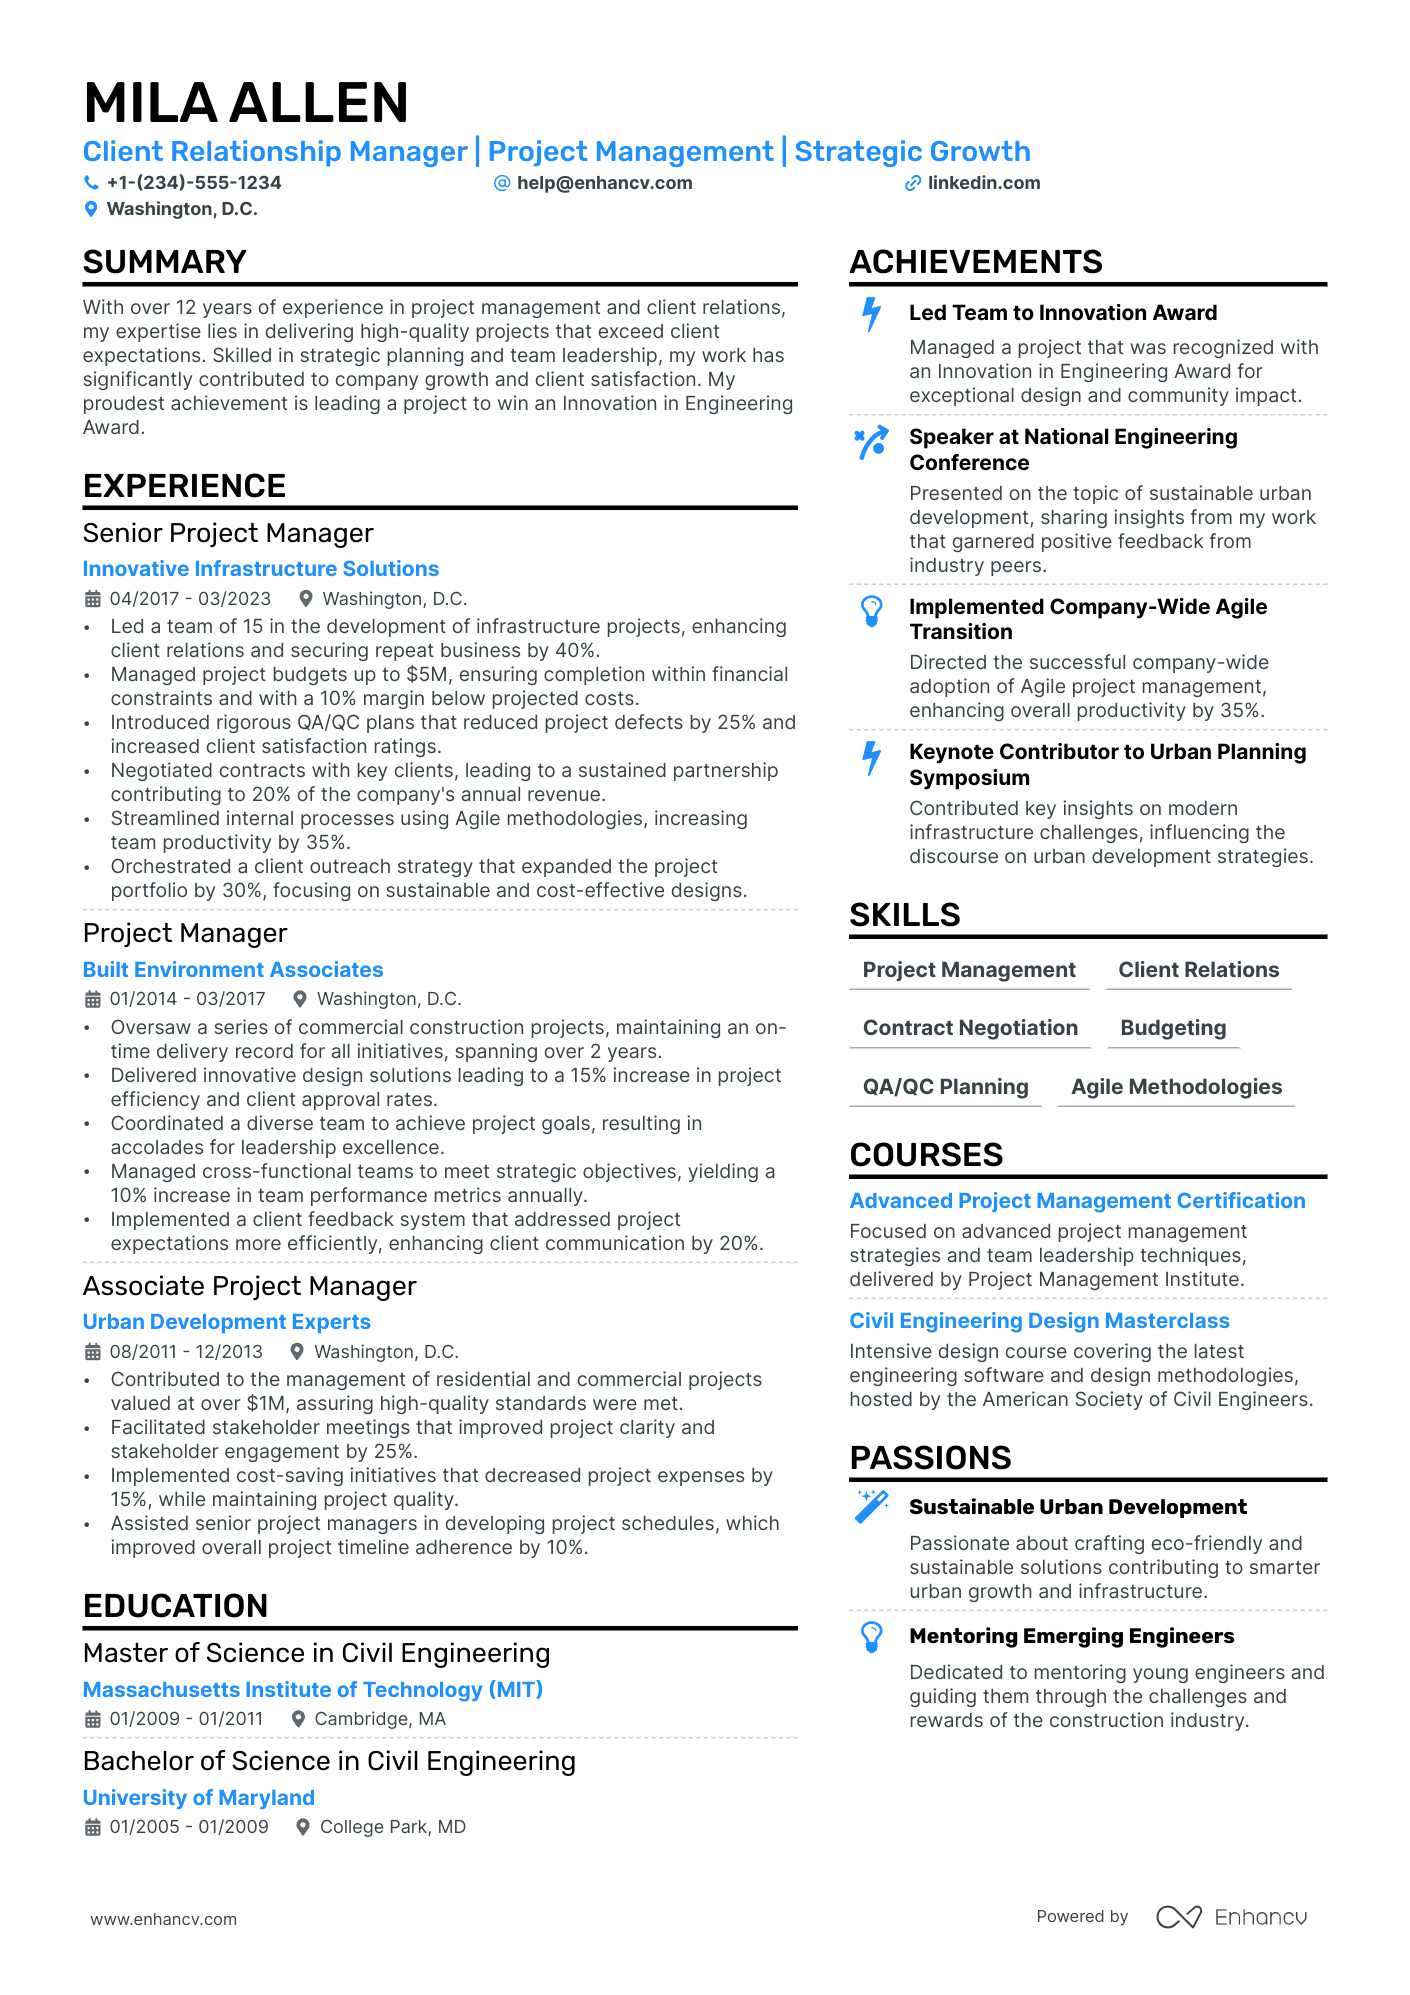 CRM Project Manager resume example